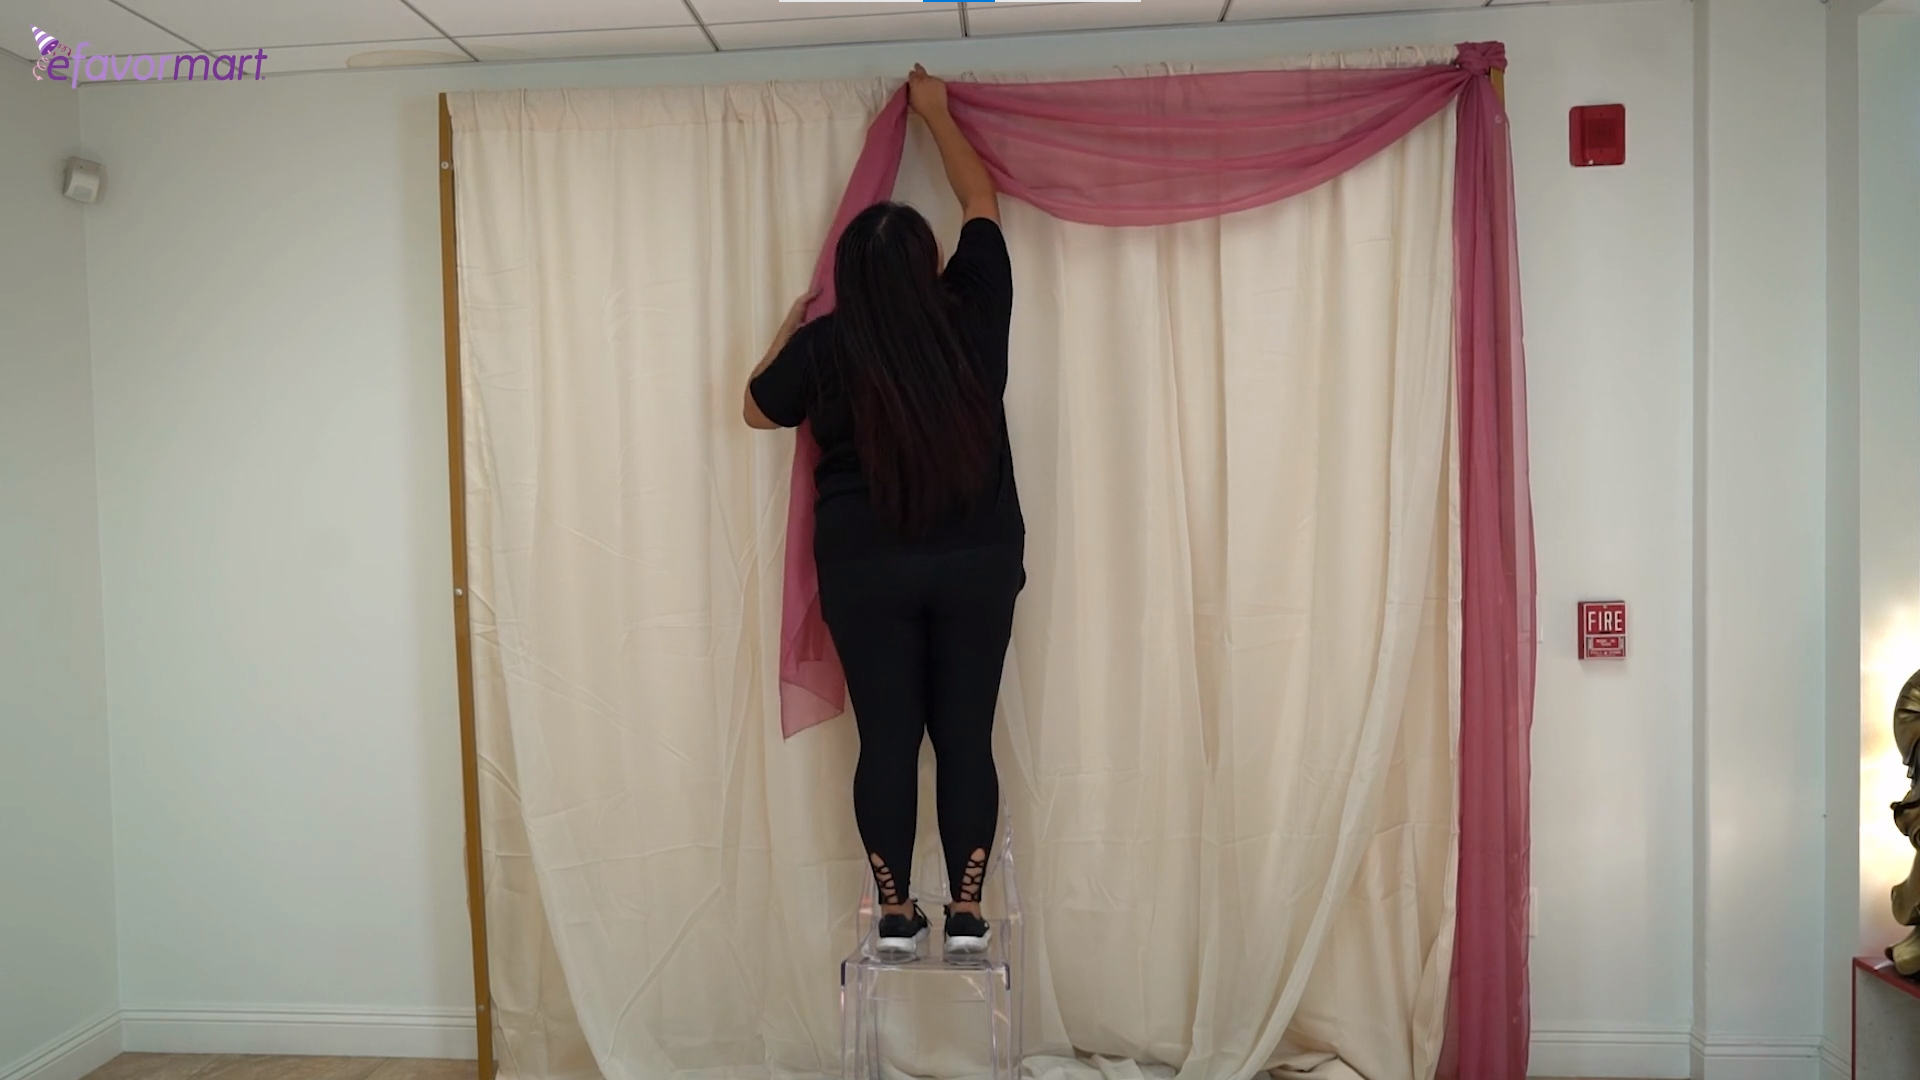 Person assembling a backdrop stand with curtain drapes